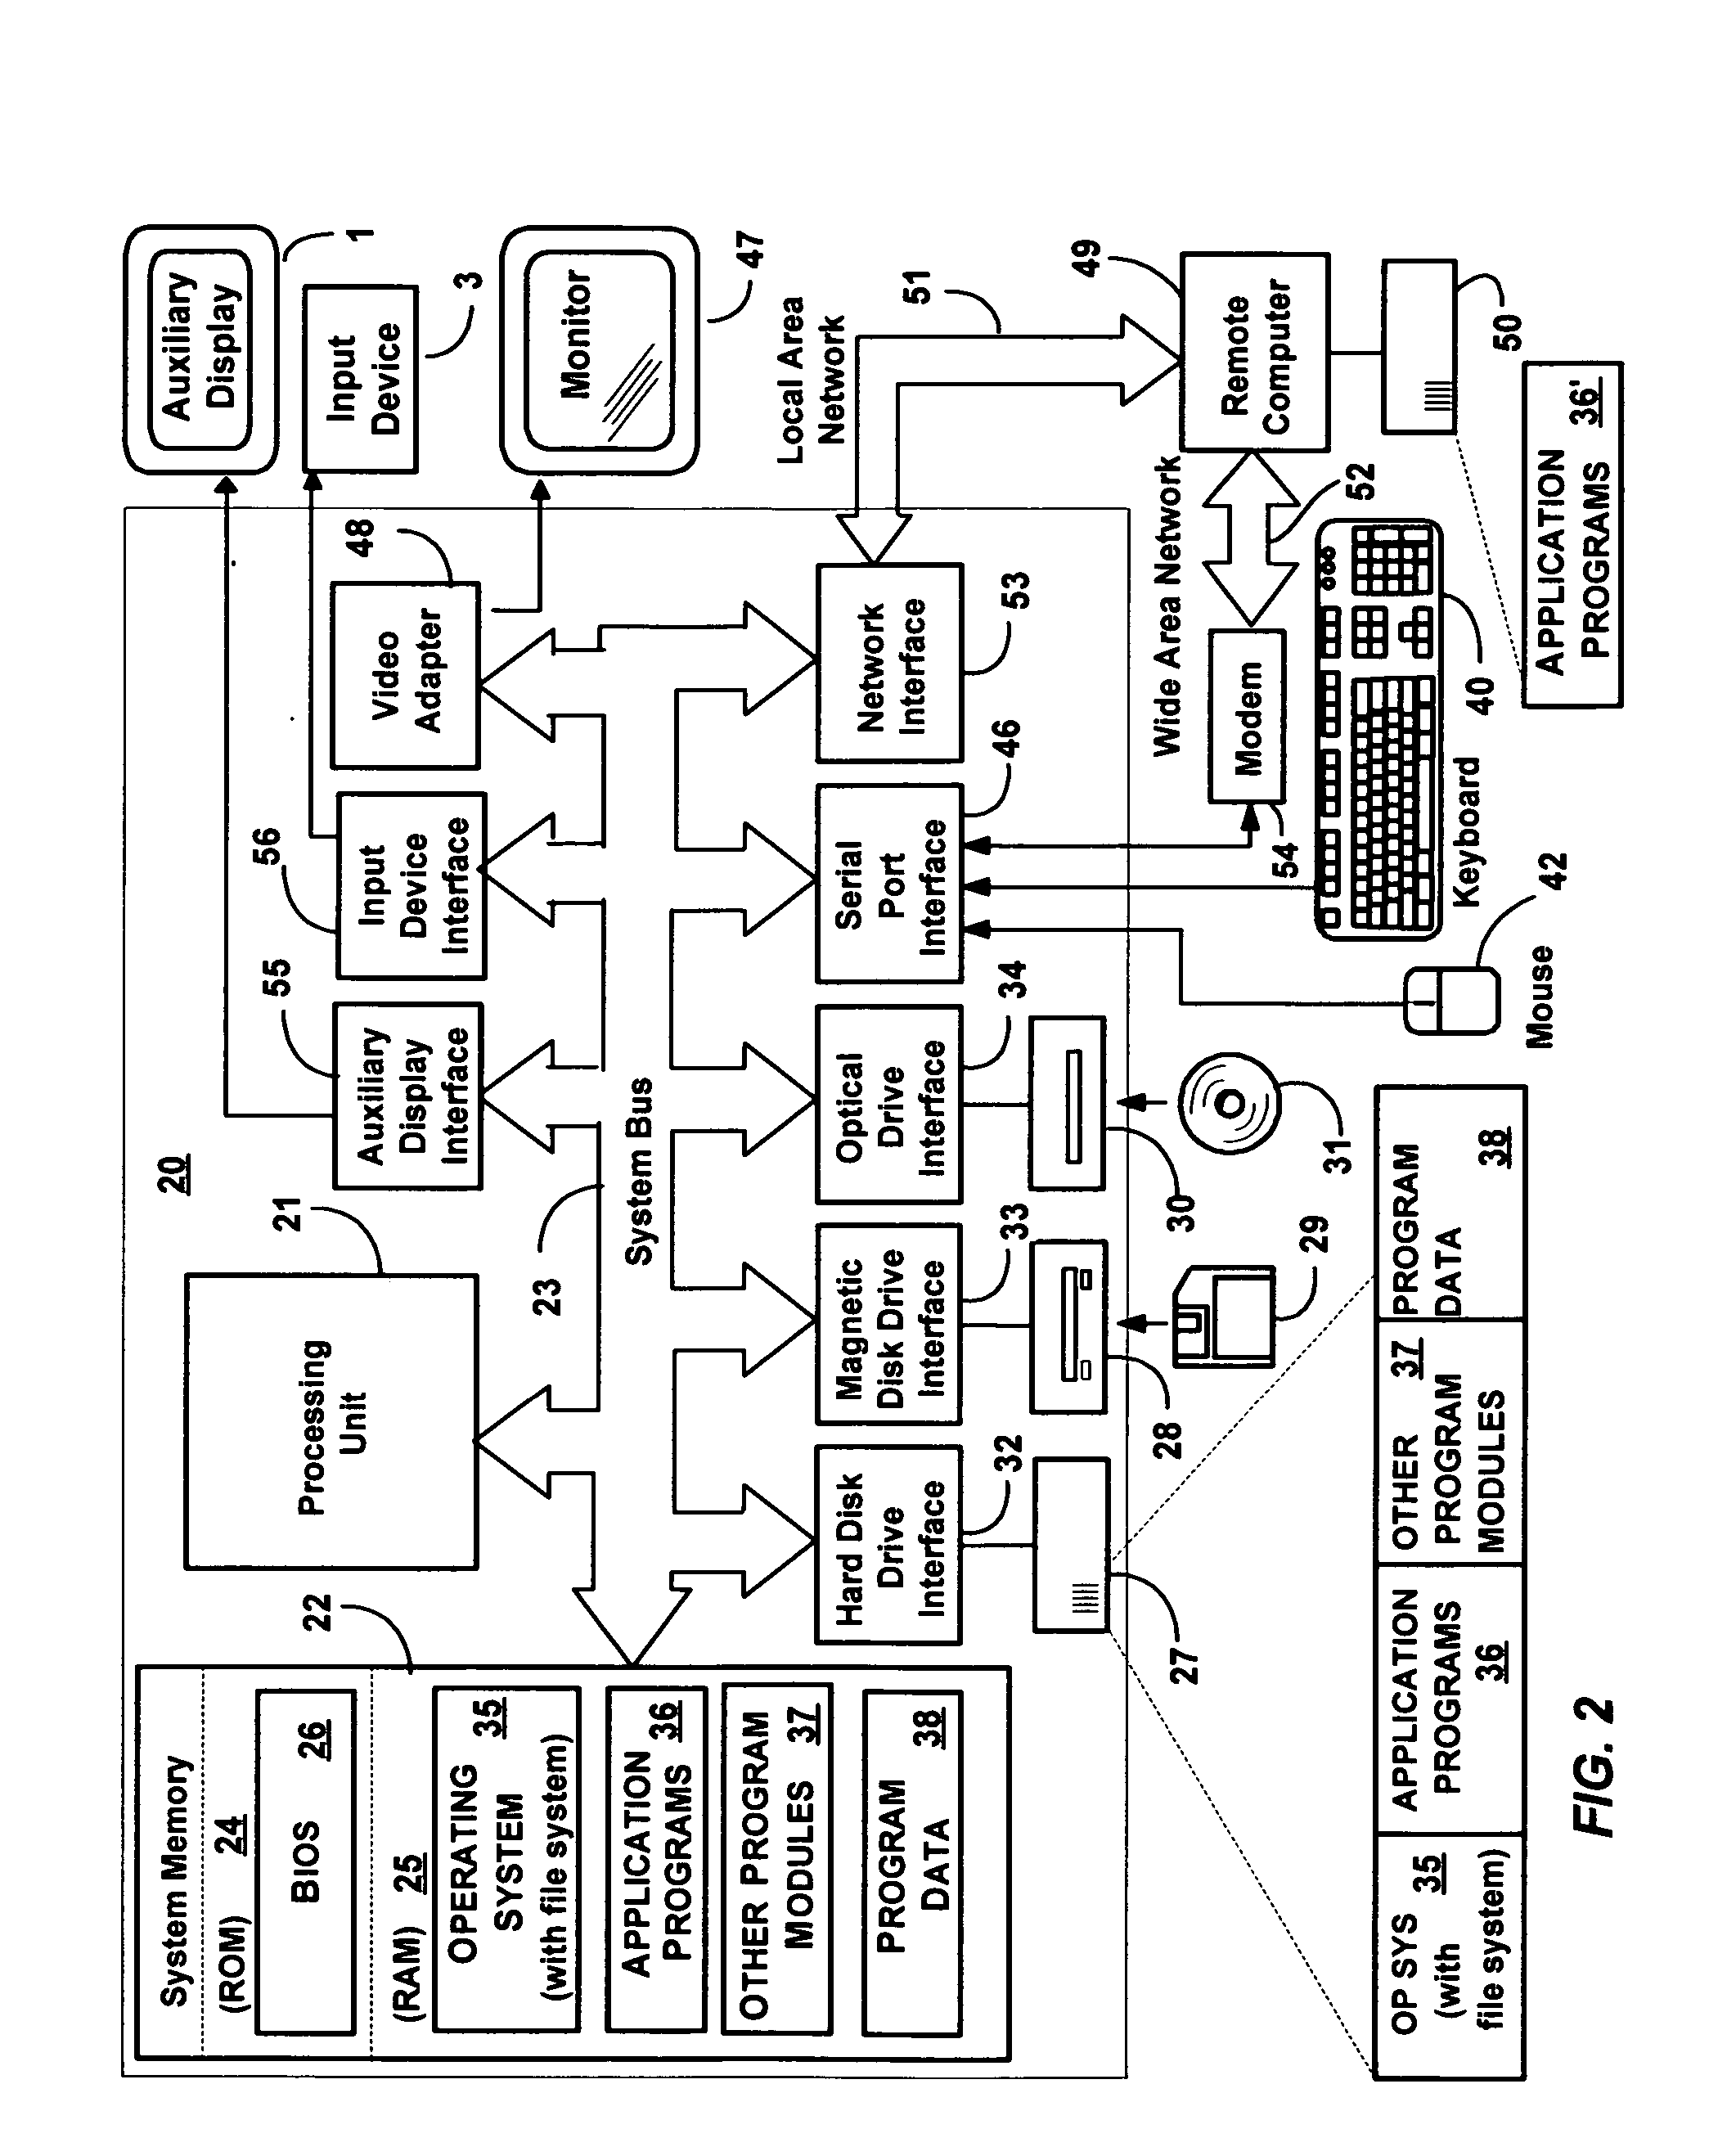 Method and system for auxiliary display of information for a computing device